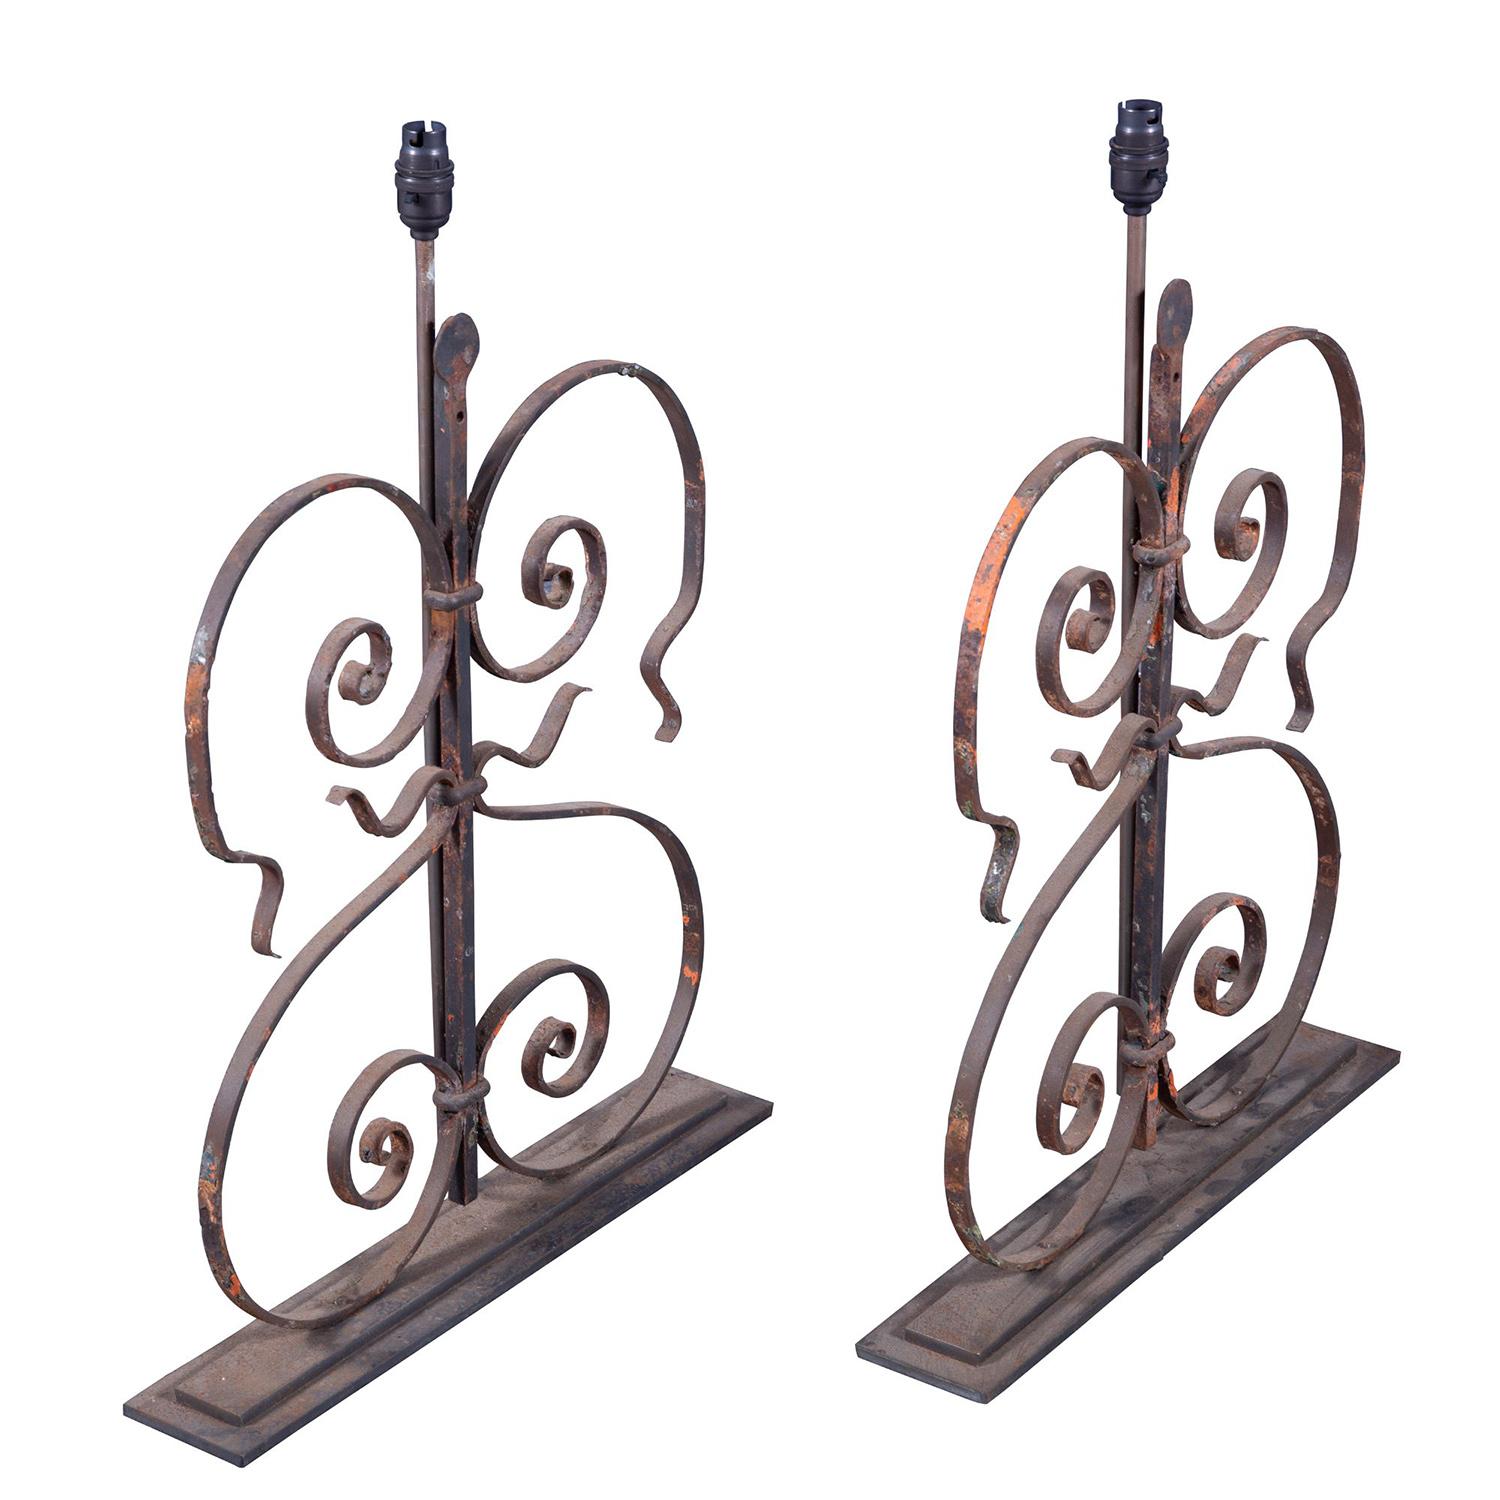 This pair of 19th century lamps are made from architectural fragments of a French 19th century metal balustrade. This piece has been rewired with silk cord to UK standards and PAT tested.